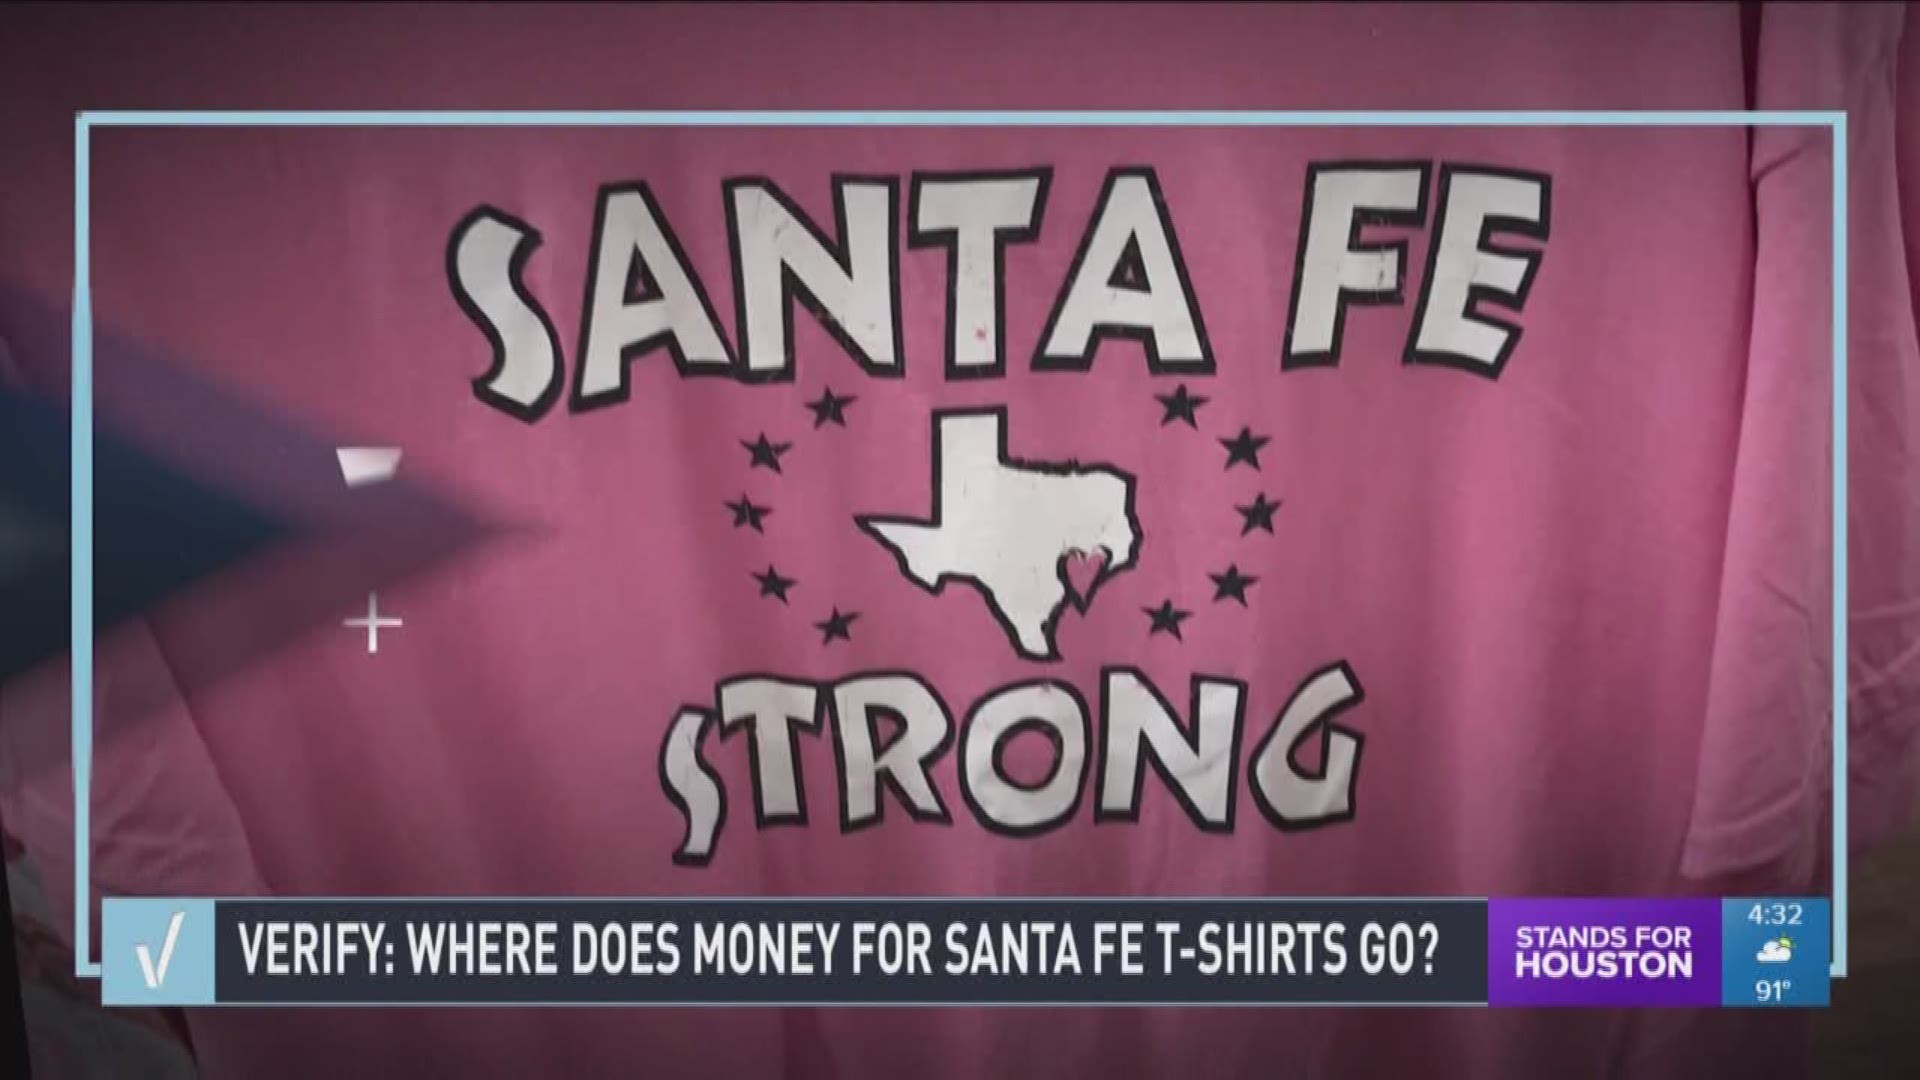 After KHOU 11 contacted Walmart about Santa Fe Strong shirts, the company changed it's mind about where the proceeds from the shirts will go and now says they will go to the victims and their families.  